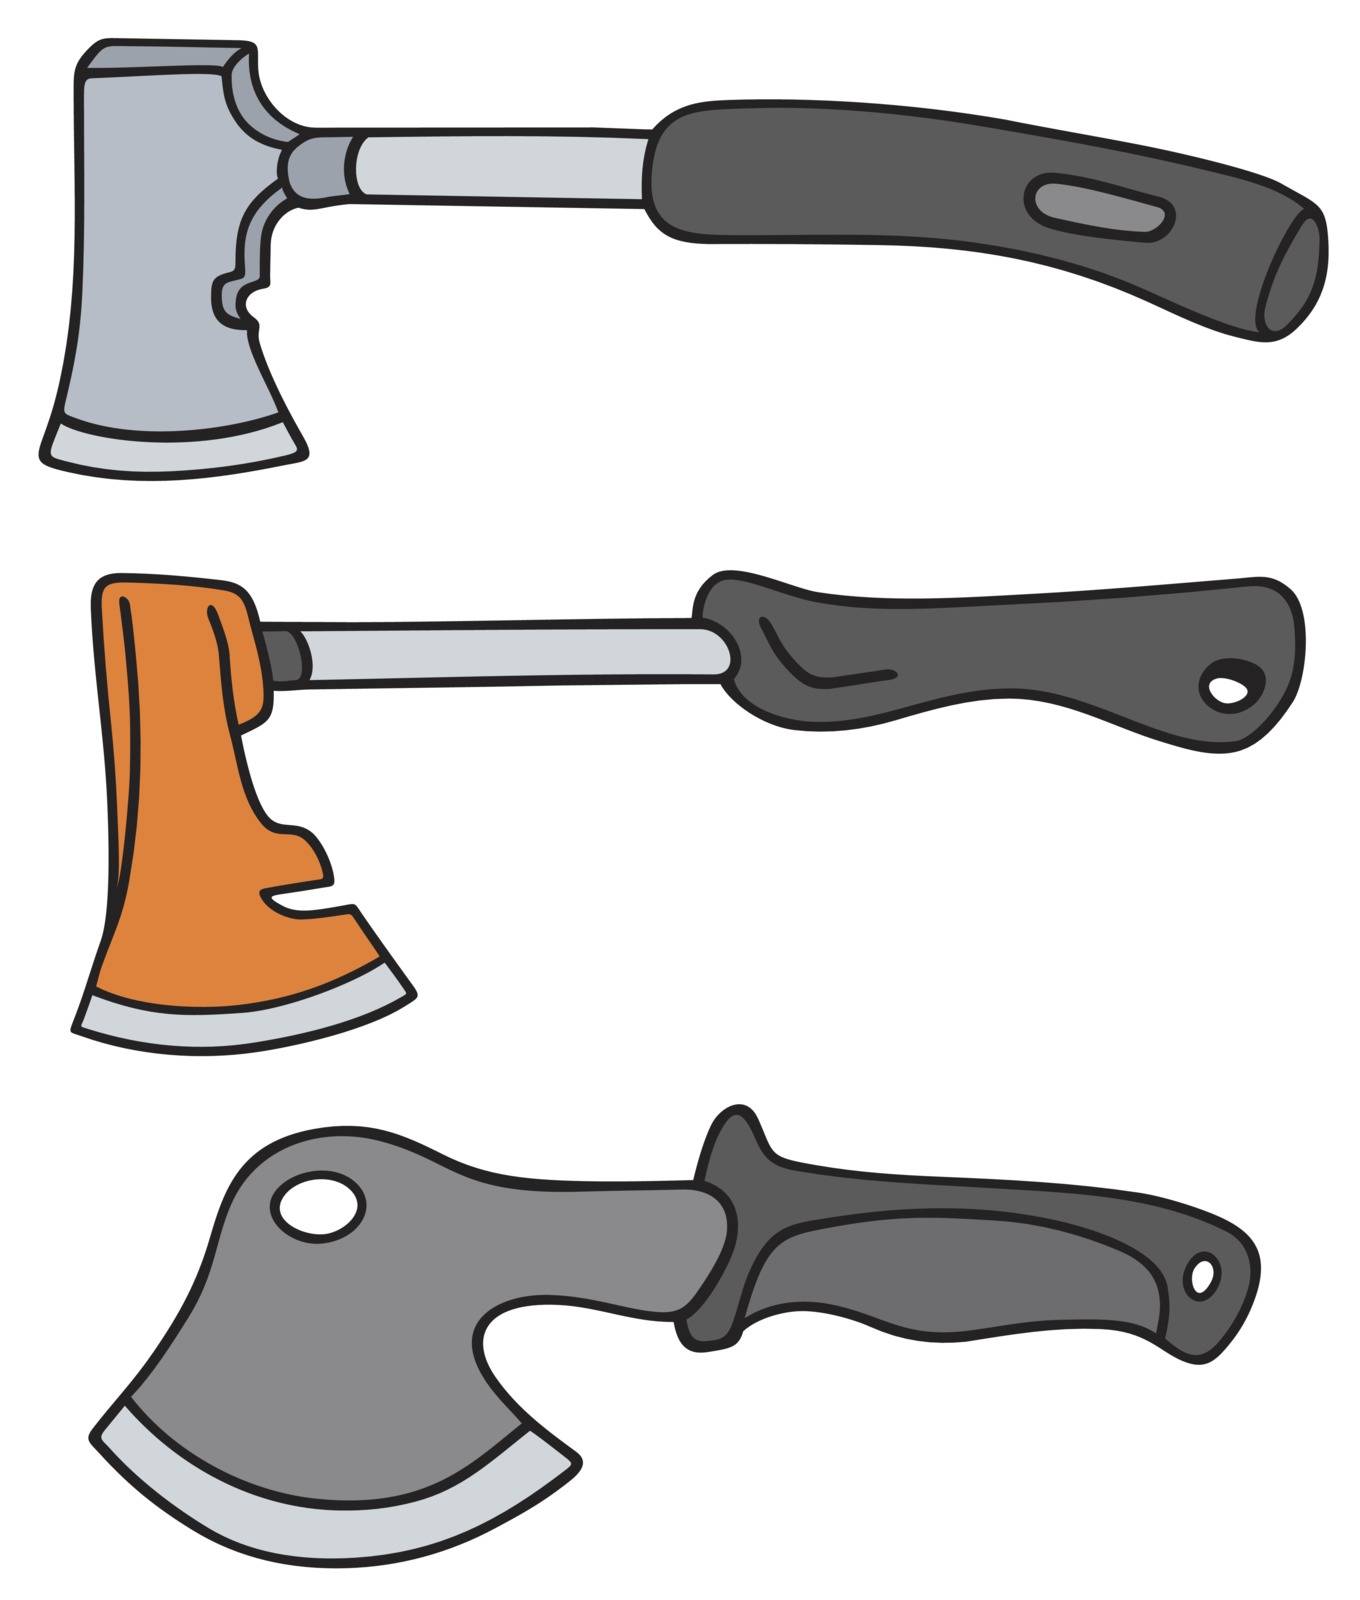 Small axes by vostal